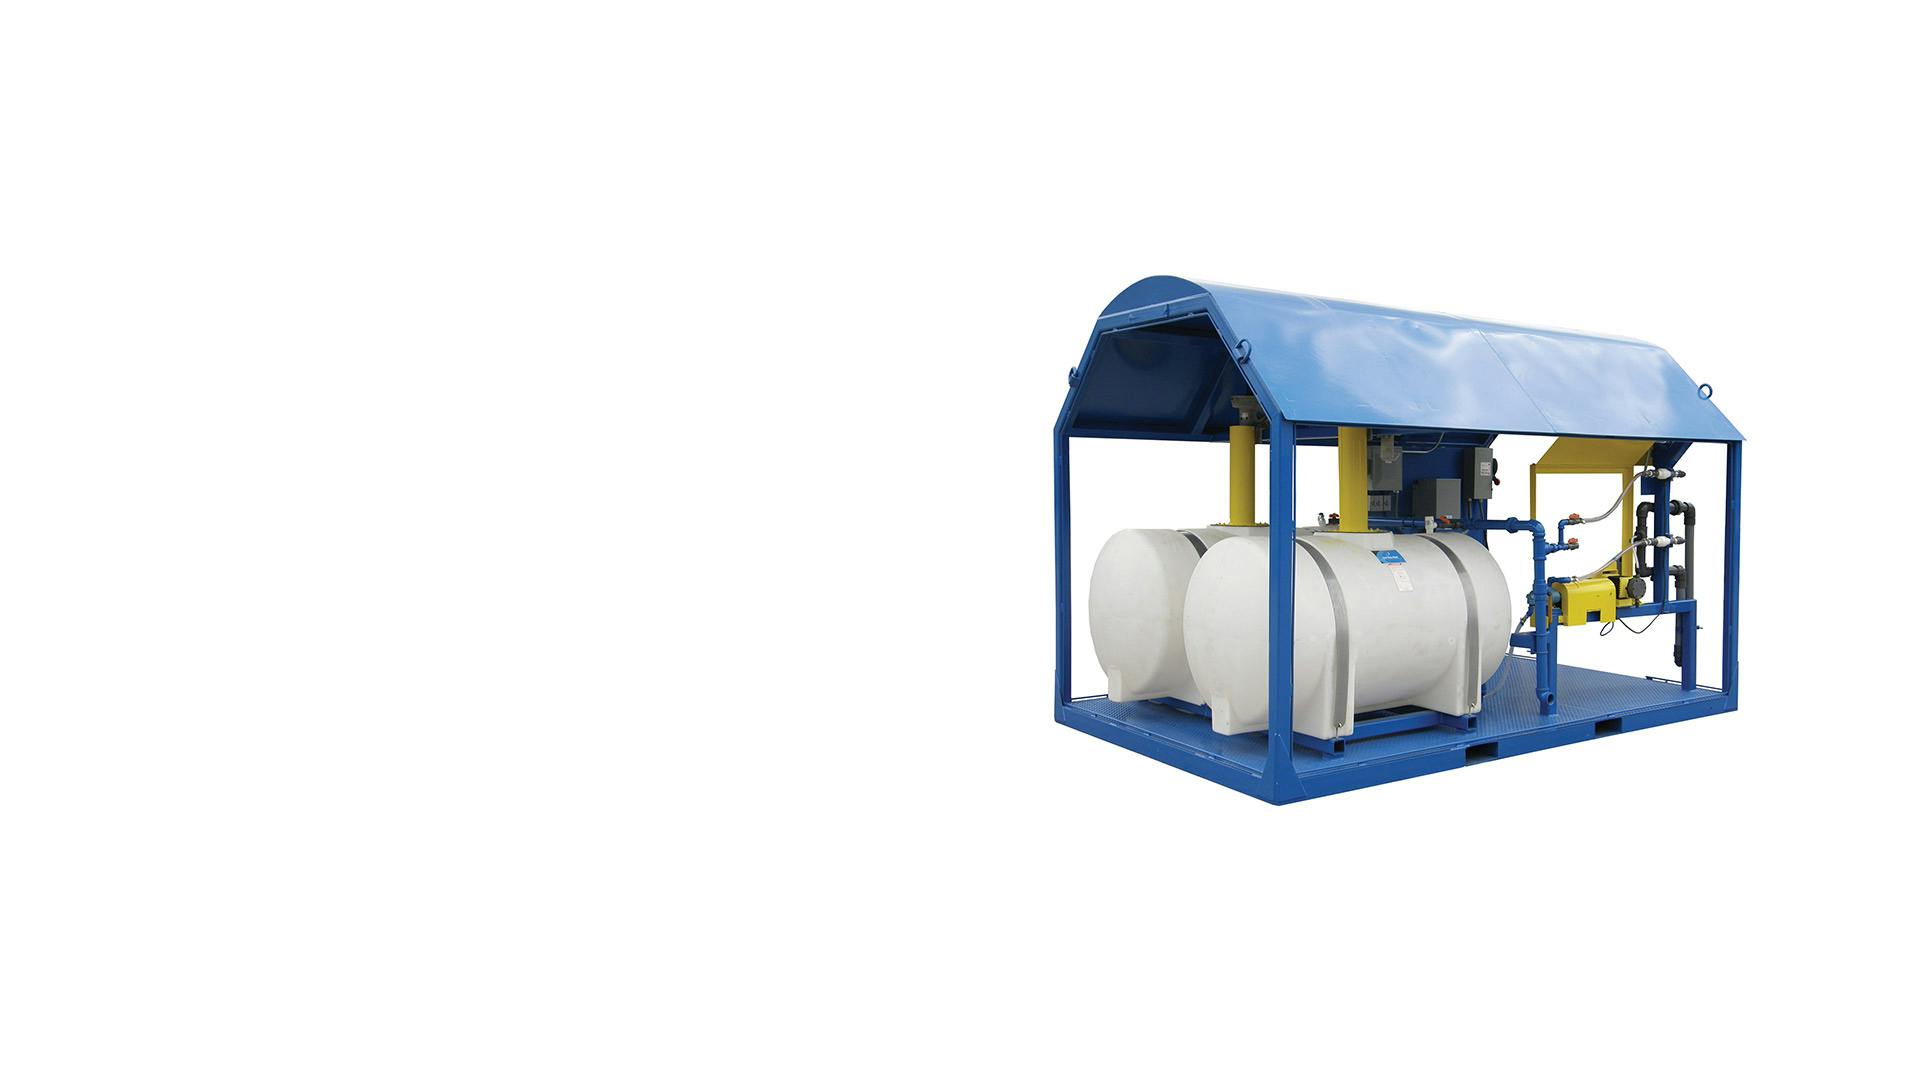 A render of a dewatering water-based drilling fluid unit from a front angle